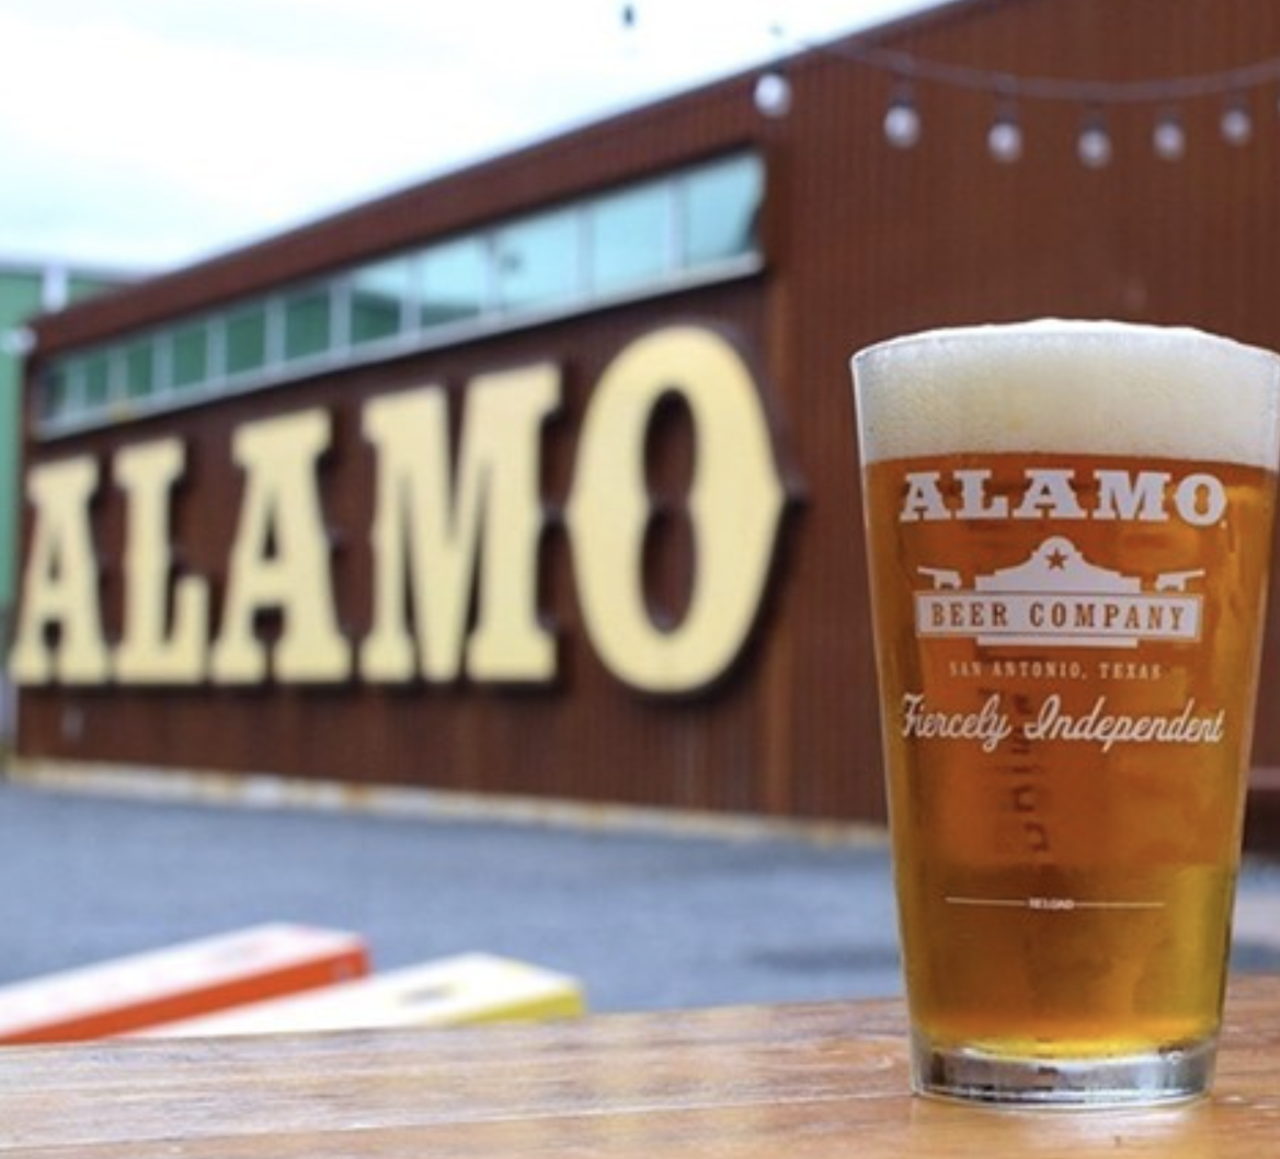 Alamo Beer Company
415 Burnet St., (210) 872-5589, alamobeer.com
With such a strong history at this brewery (like, Prohibition and everything), Alamo Beer Company will almost feel like drinking here is a rite of passage as a San Antonian. Get a taste of Europe with the German Pale Ale or Pilsner brews.
Photo via Instagram / alamobeerco